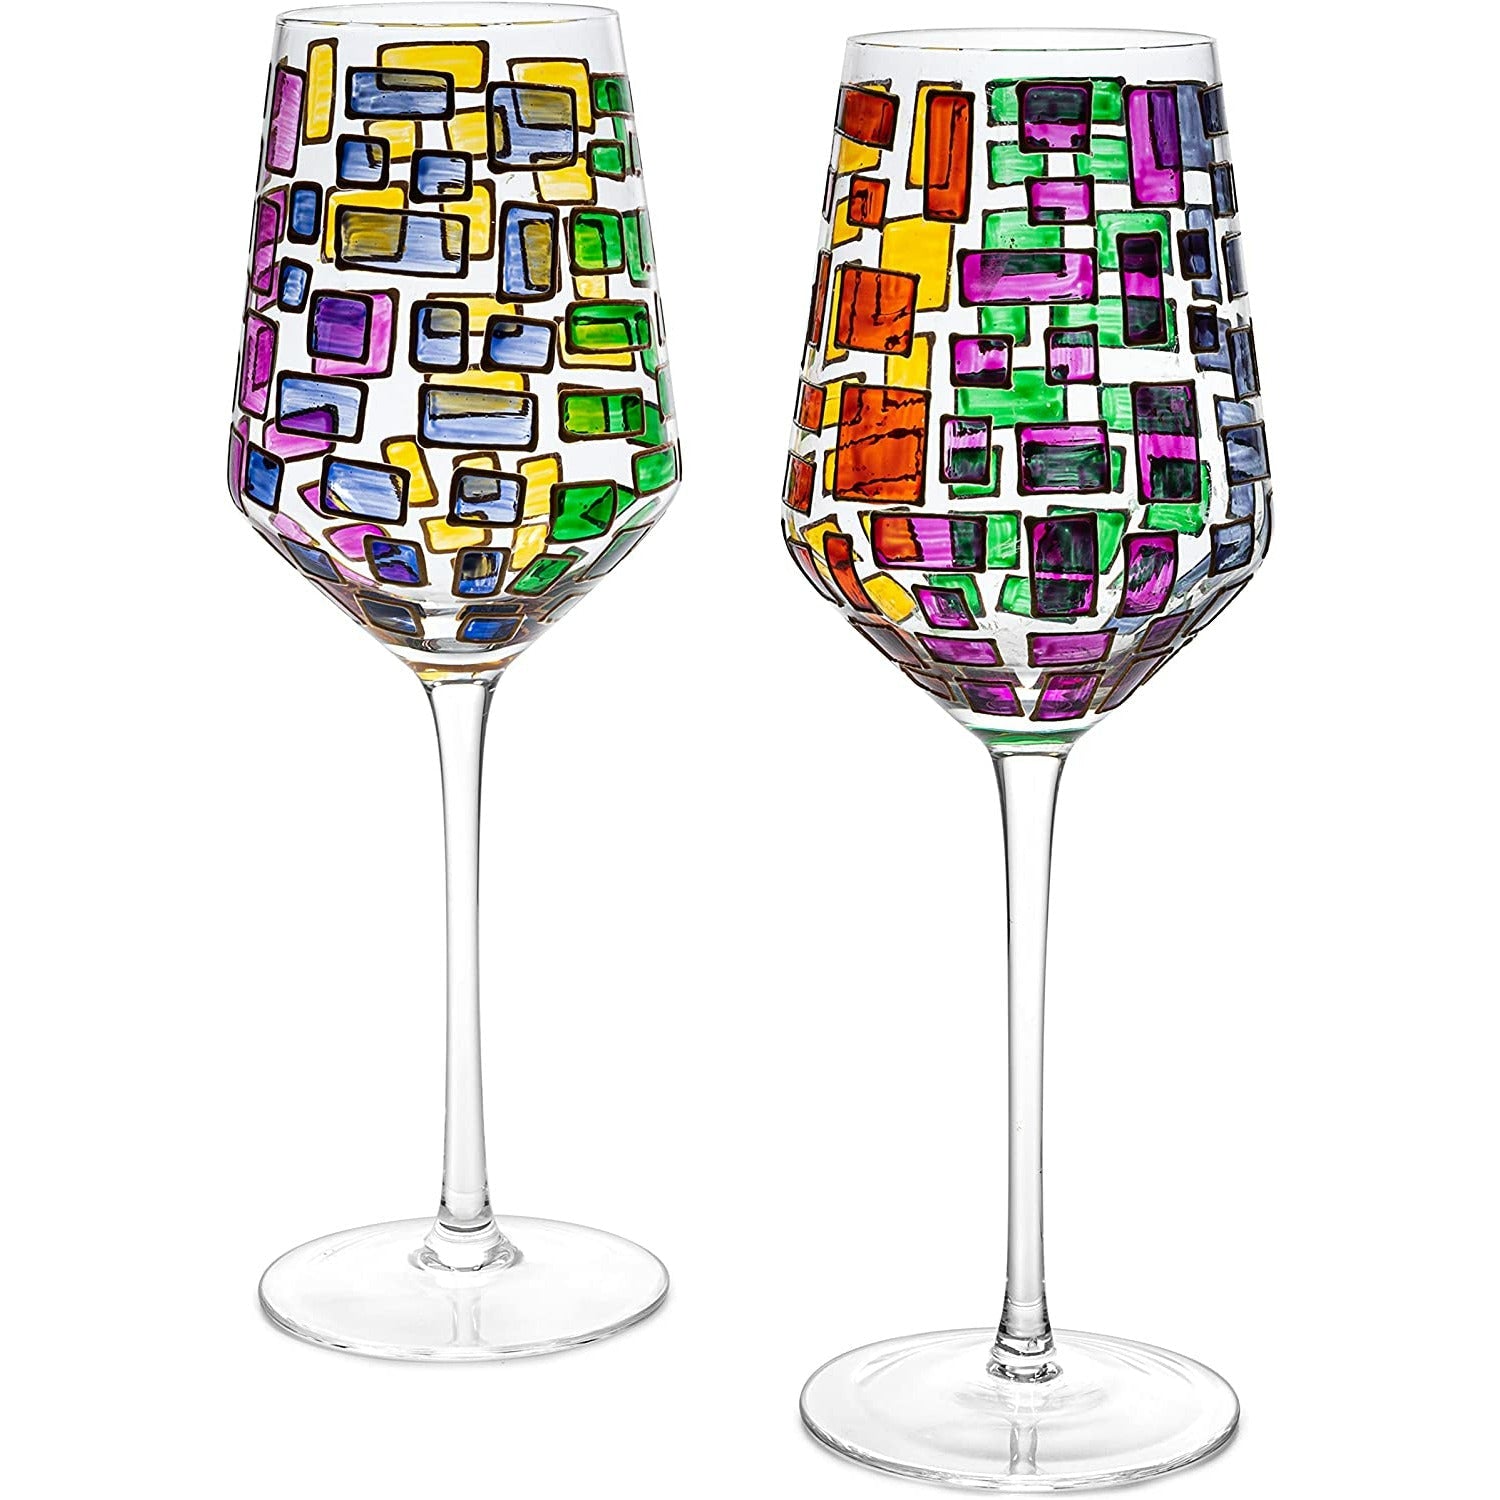 Renaissance Stained Wine Glasses Set of 2 by The Wine Savant - Festive  Colorful Coffee Cups, Stained Window, Multicolored, Home Bar Gift, Colored